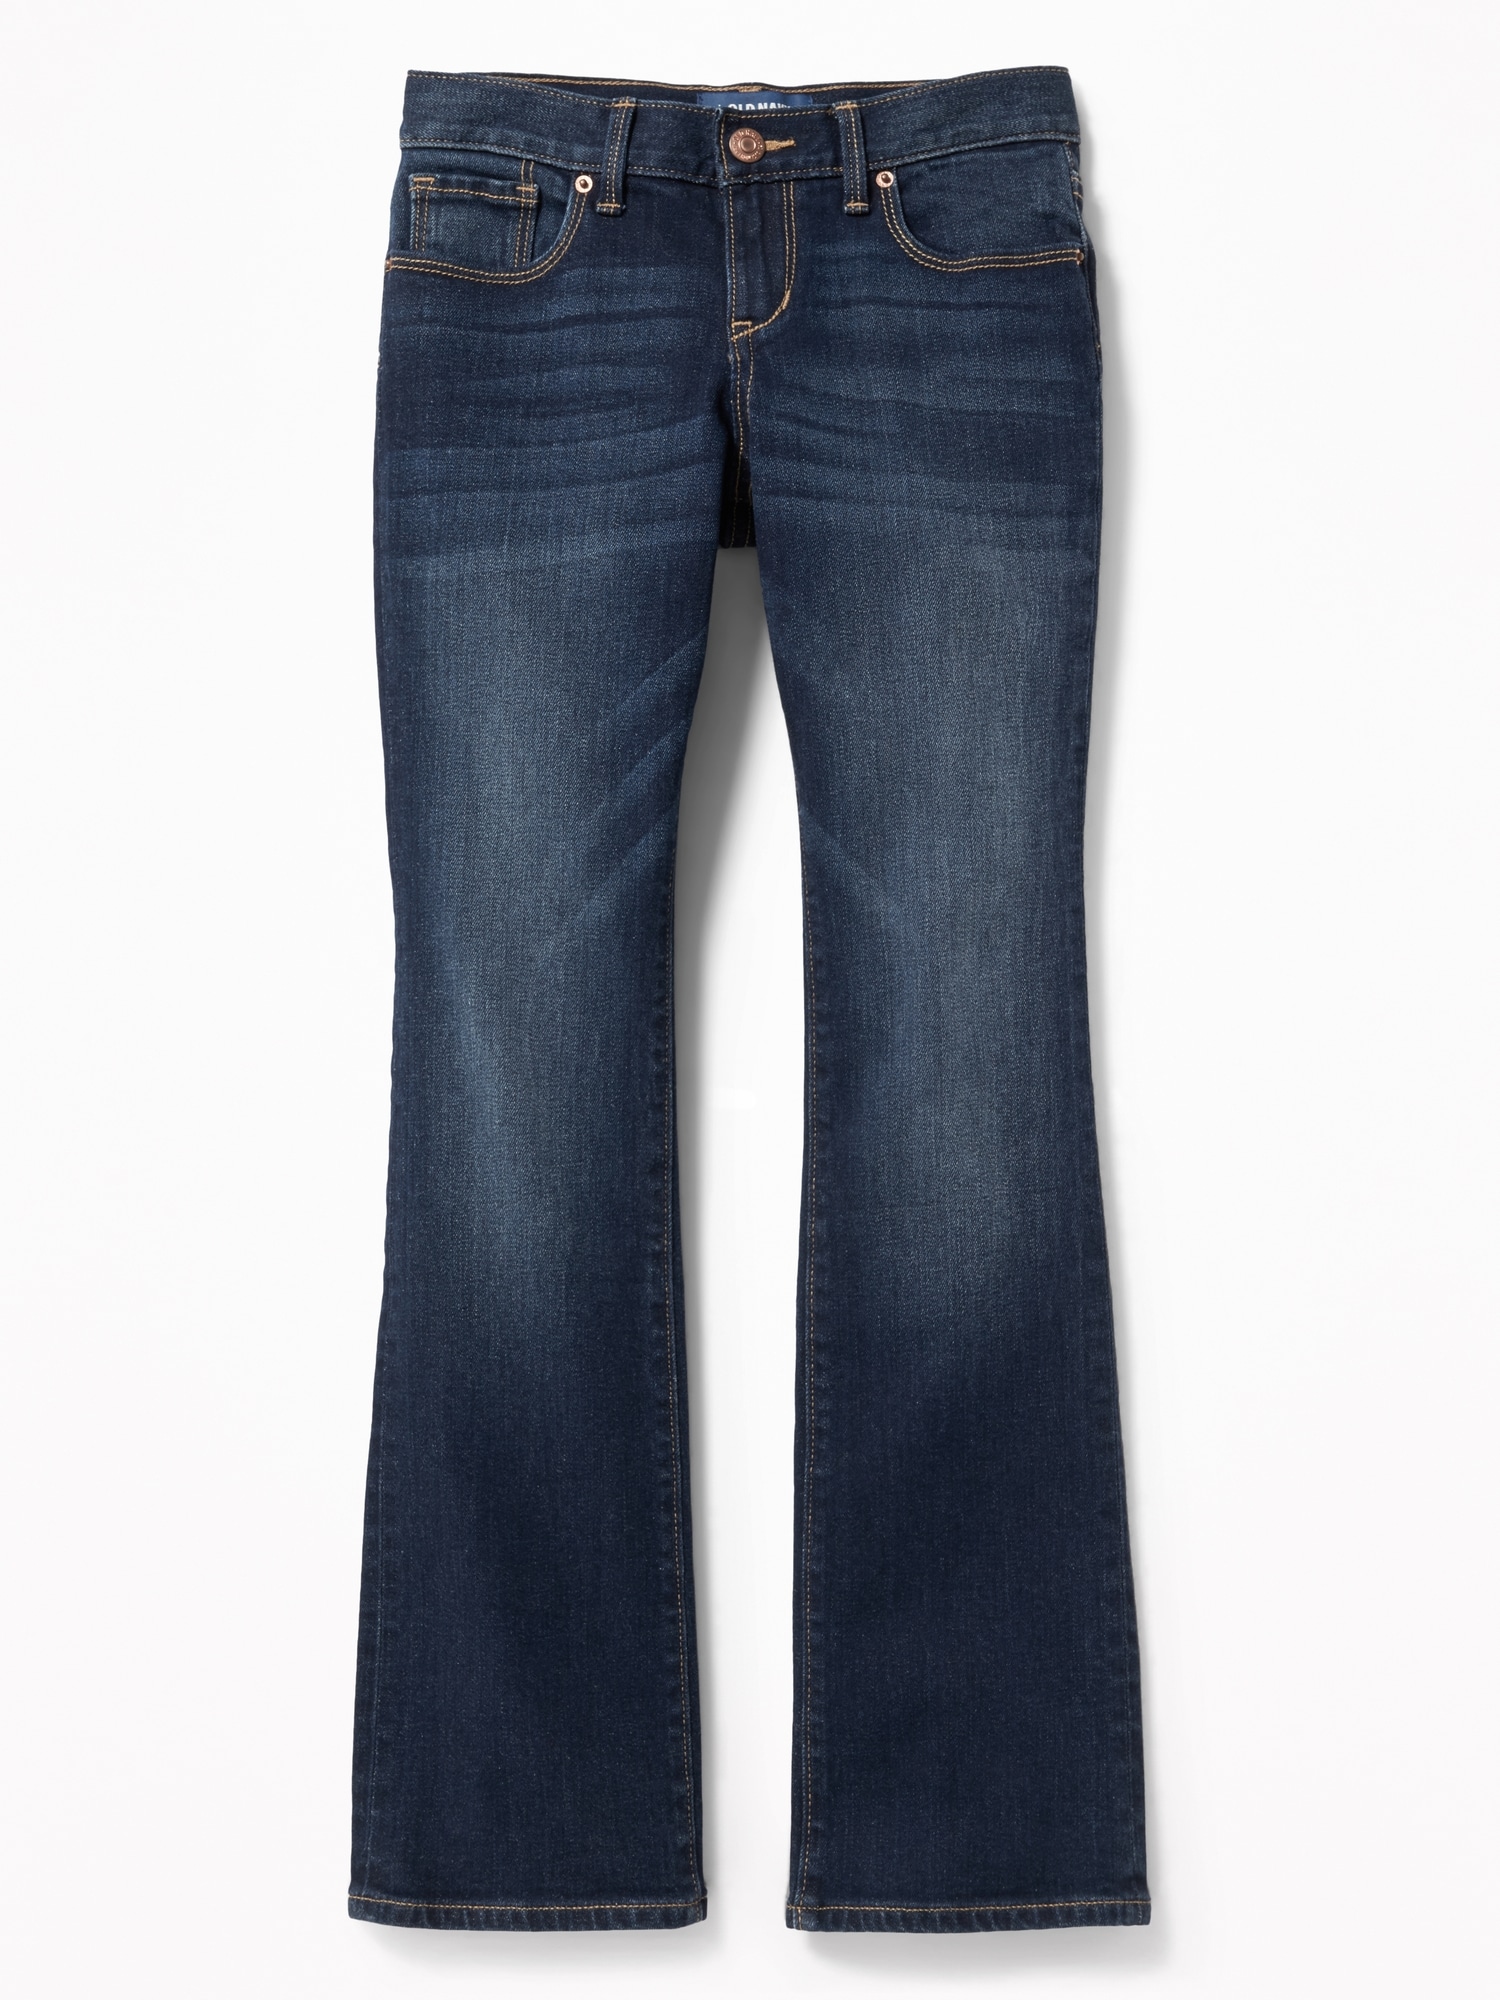 old navy jeans boot cut